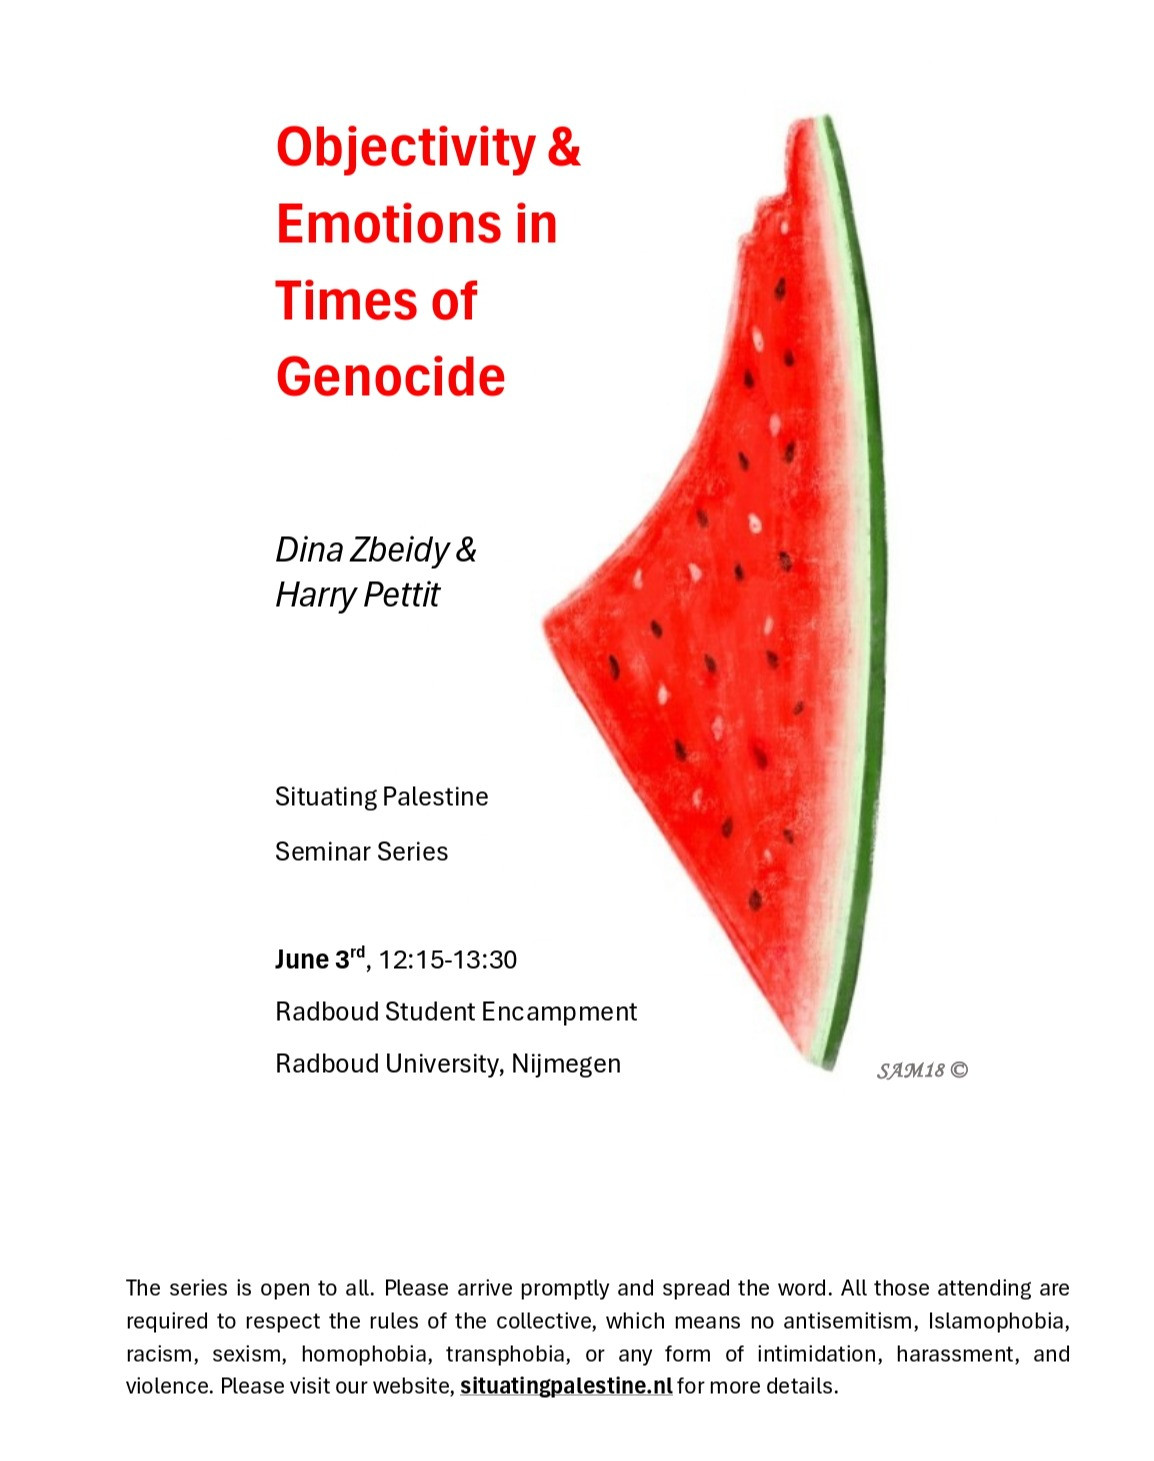 Objectivity & Emotions in Times of Genocide